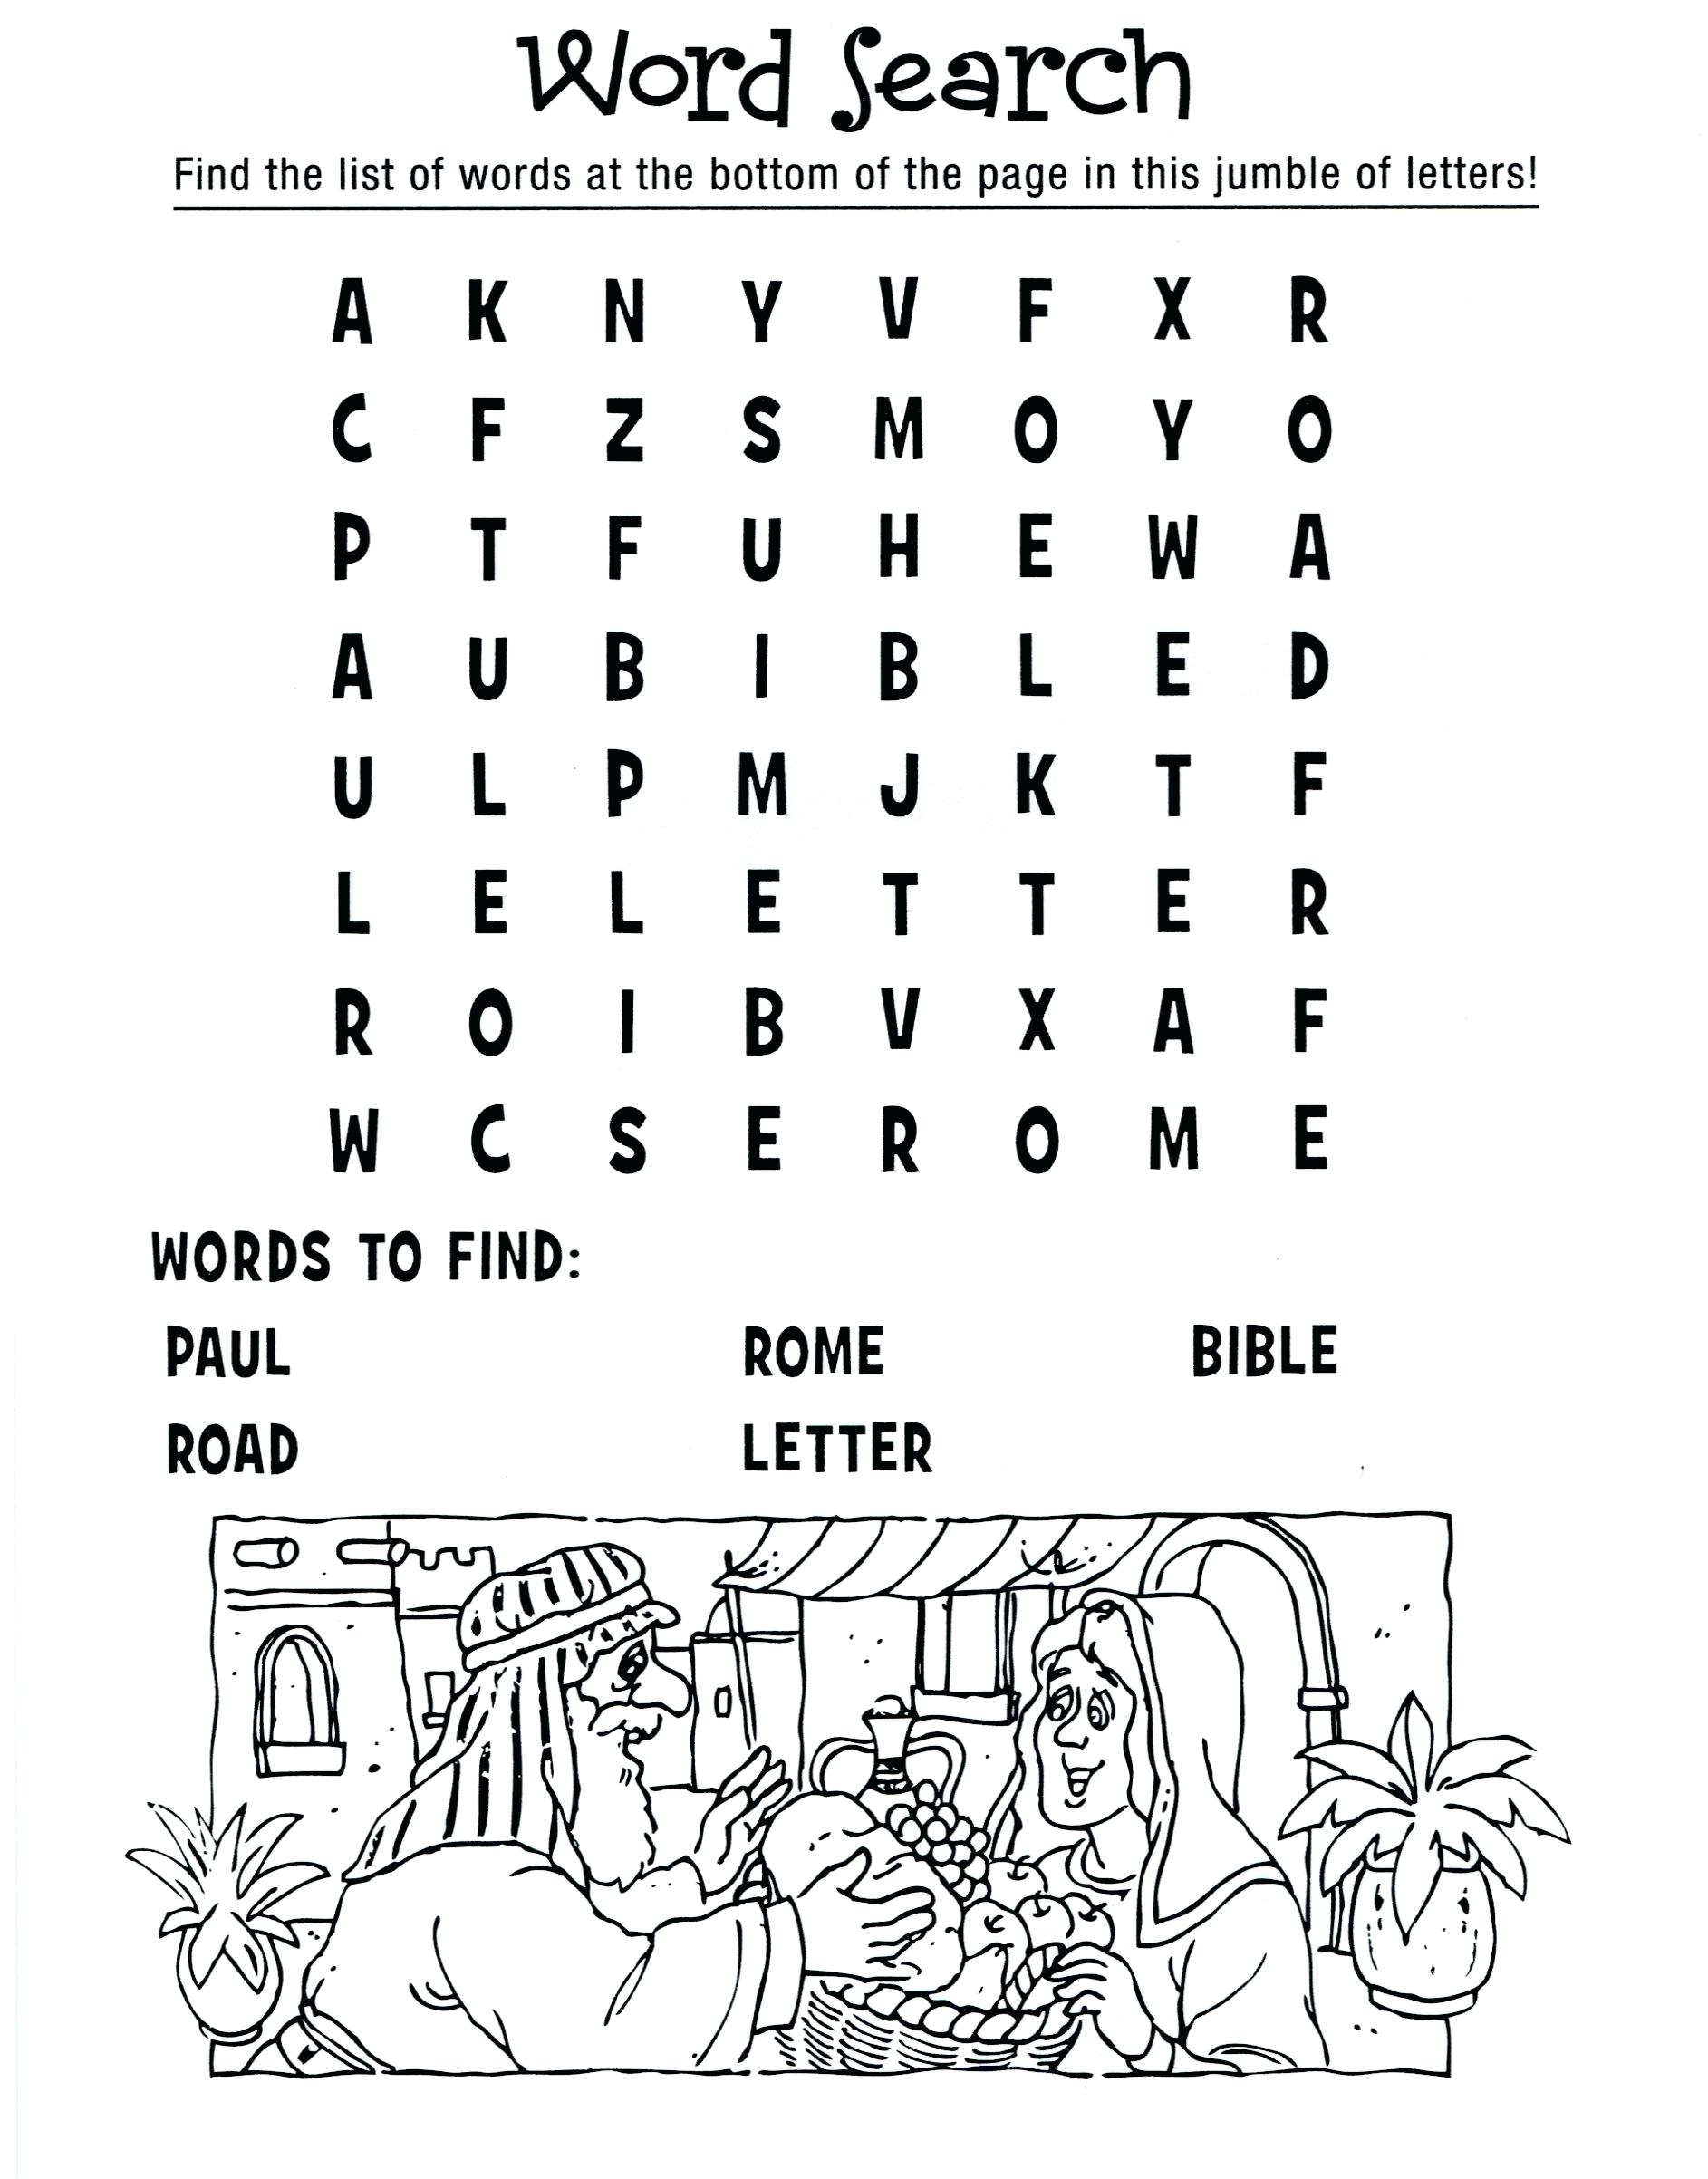 Barnabas Coloring Page Paul And Barnabas Missionary Journey Coloring Page Allpageco